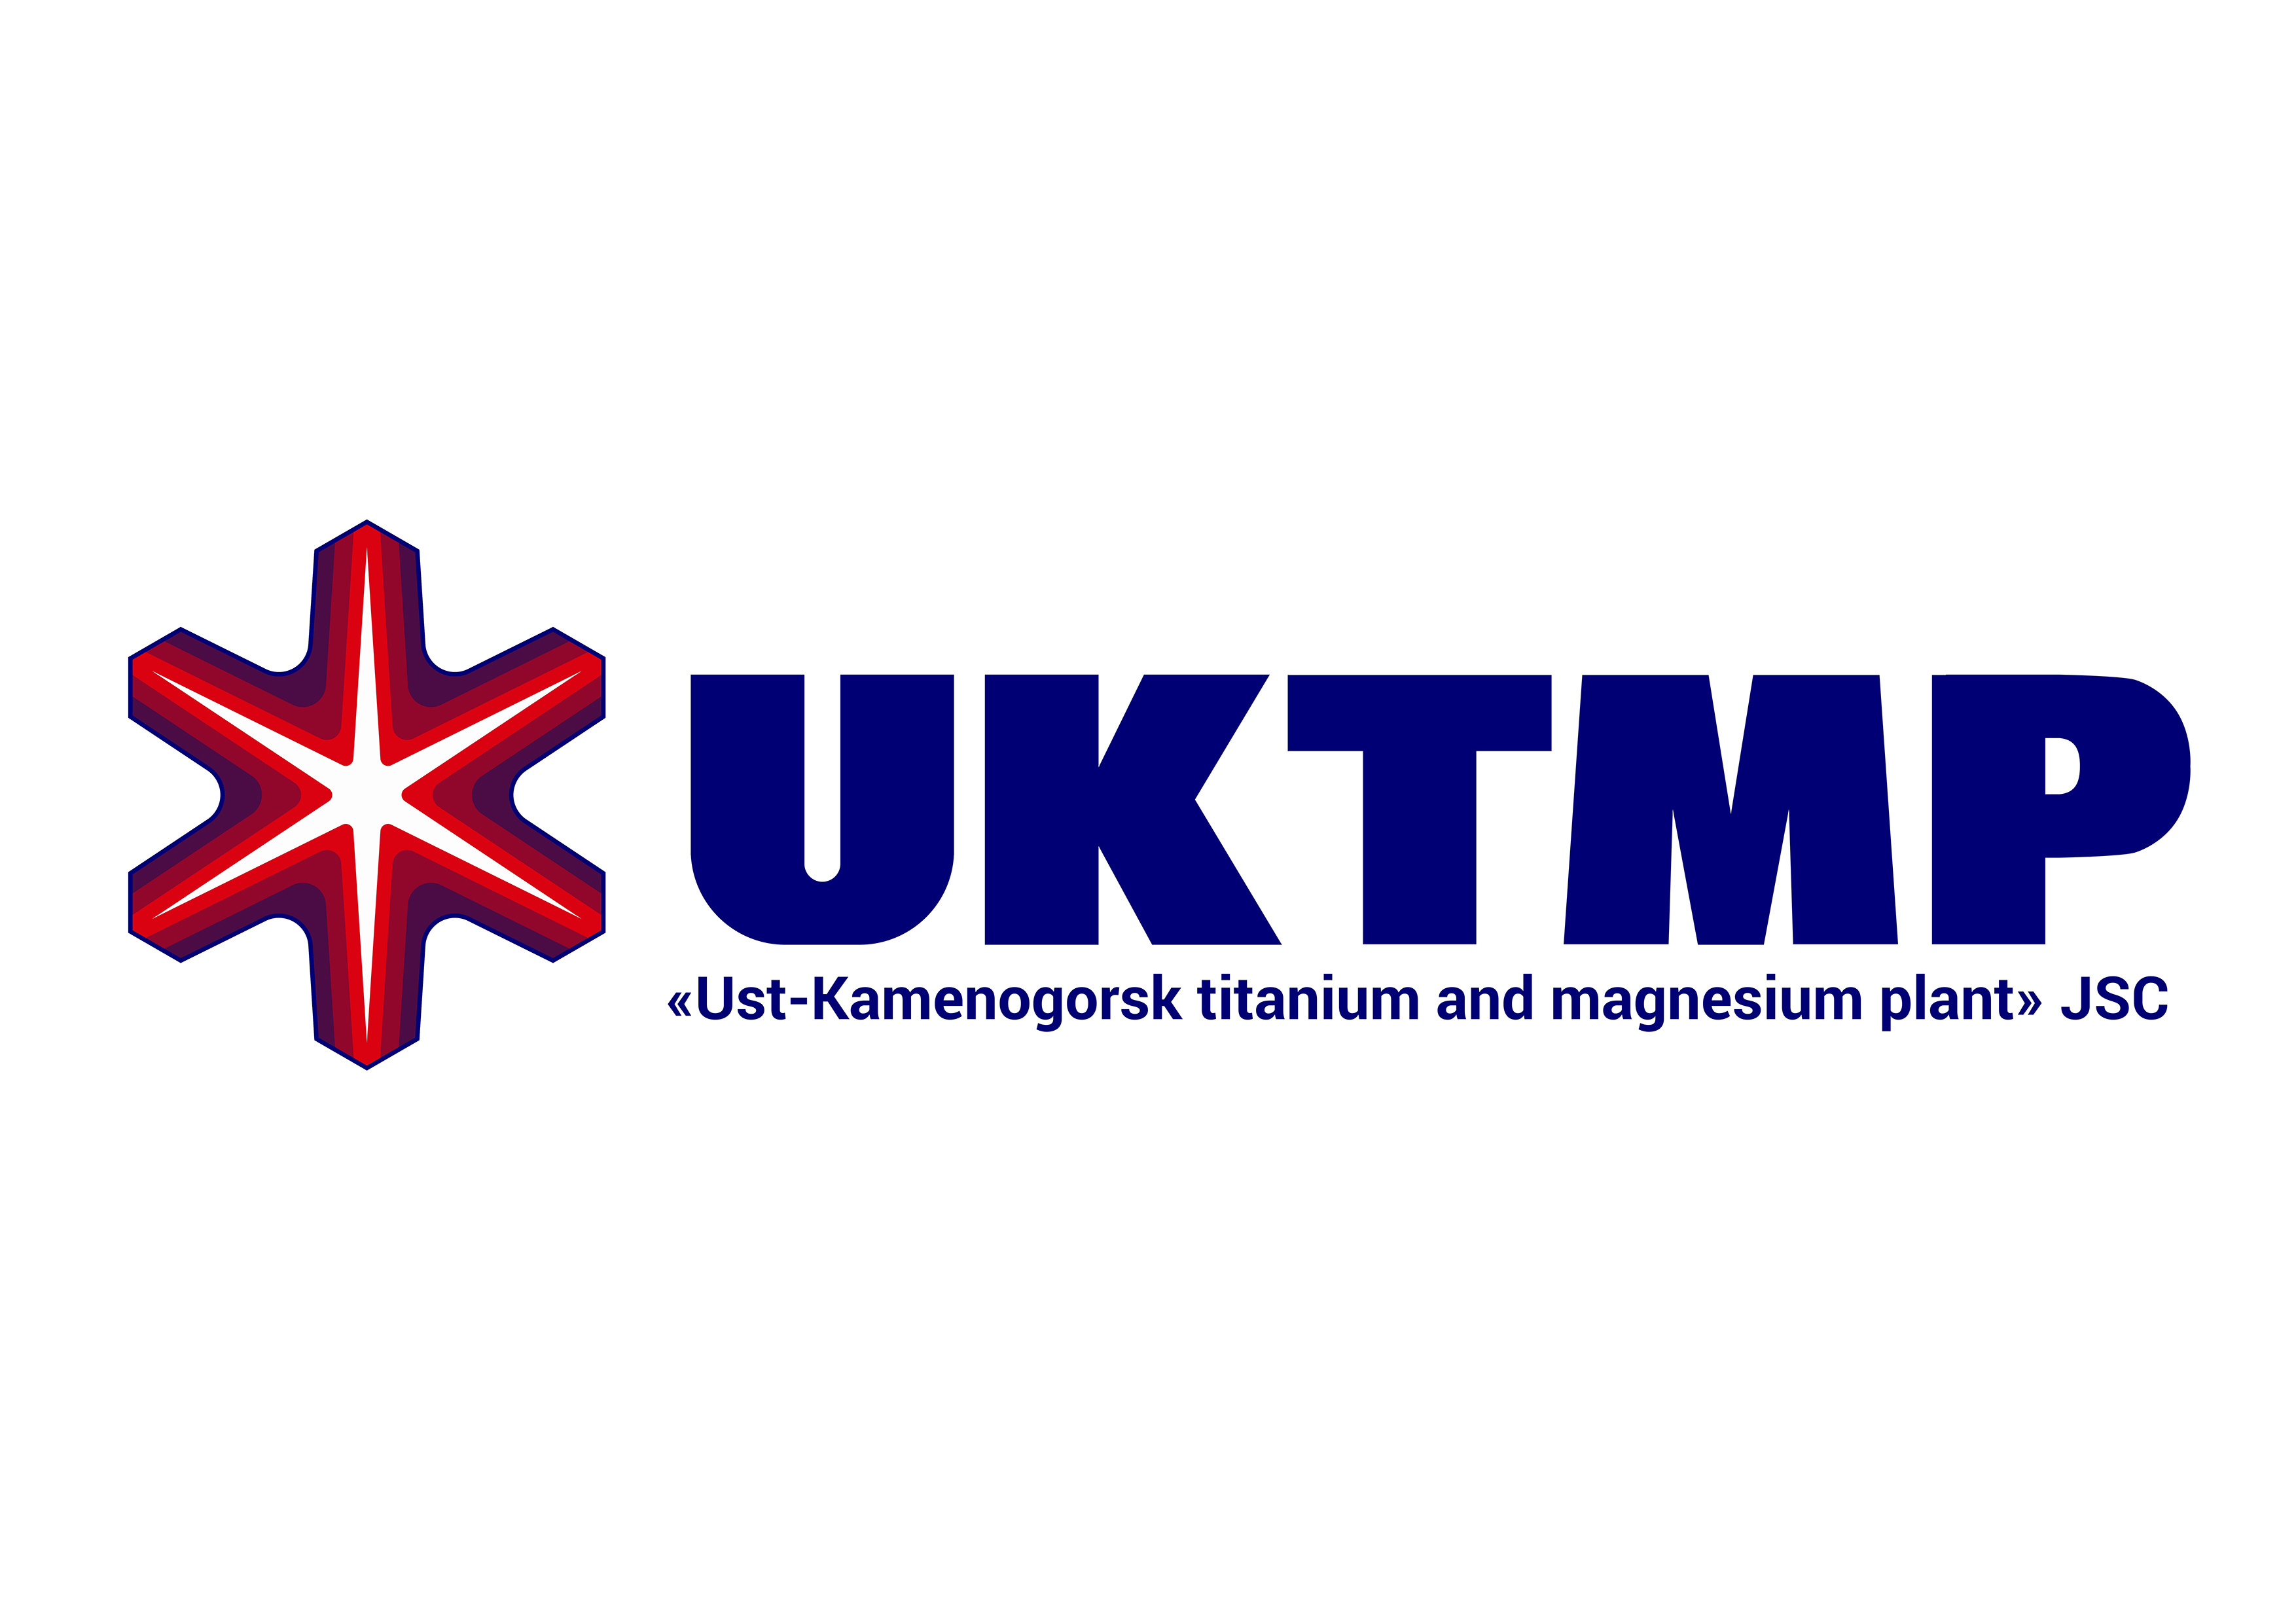 ATTENTION TO THE SHAREHOLDERS  of Ust-Kamenogorsk Titanium and Magnesium Plant JSC!